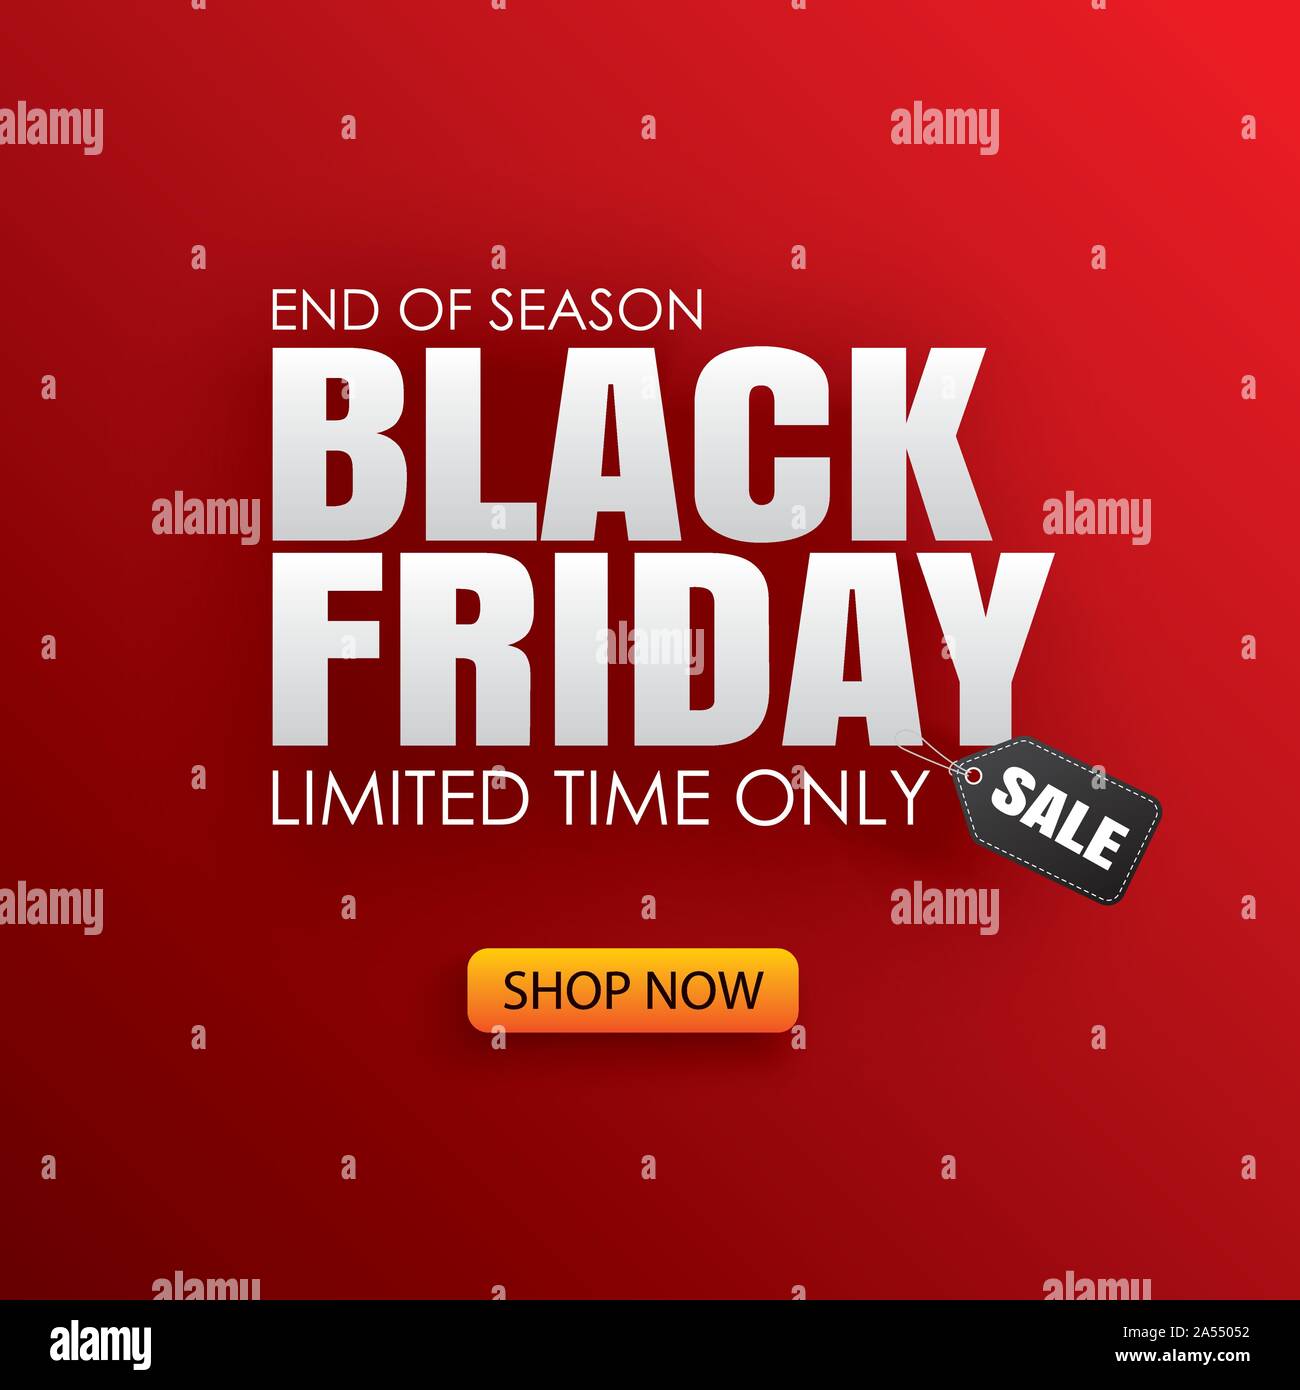 Black friday sale banner with white text on red background. Use for discount, shopping, promotion, advertising. Stock Vector